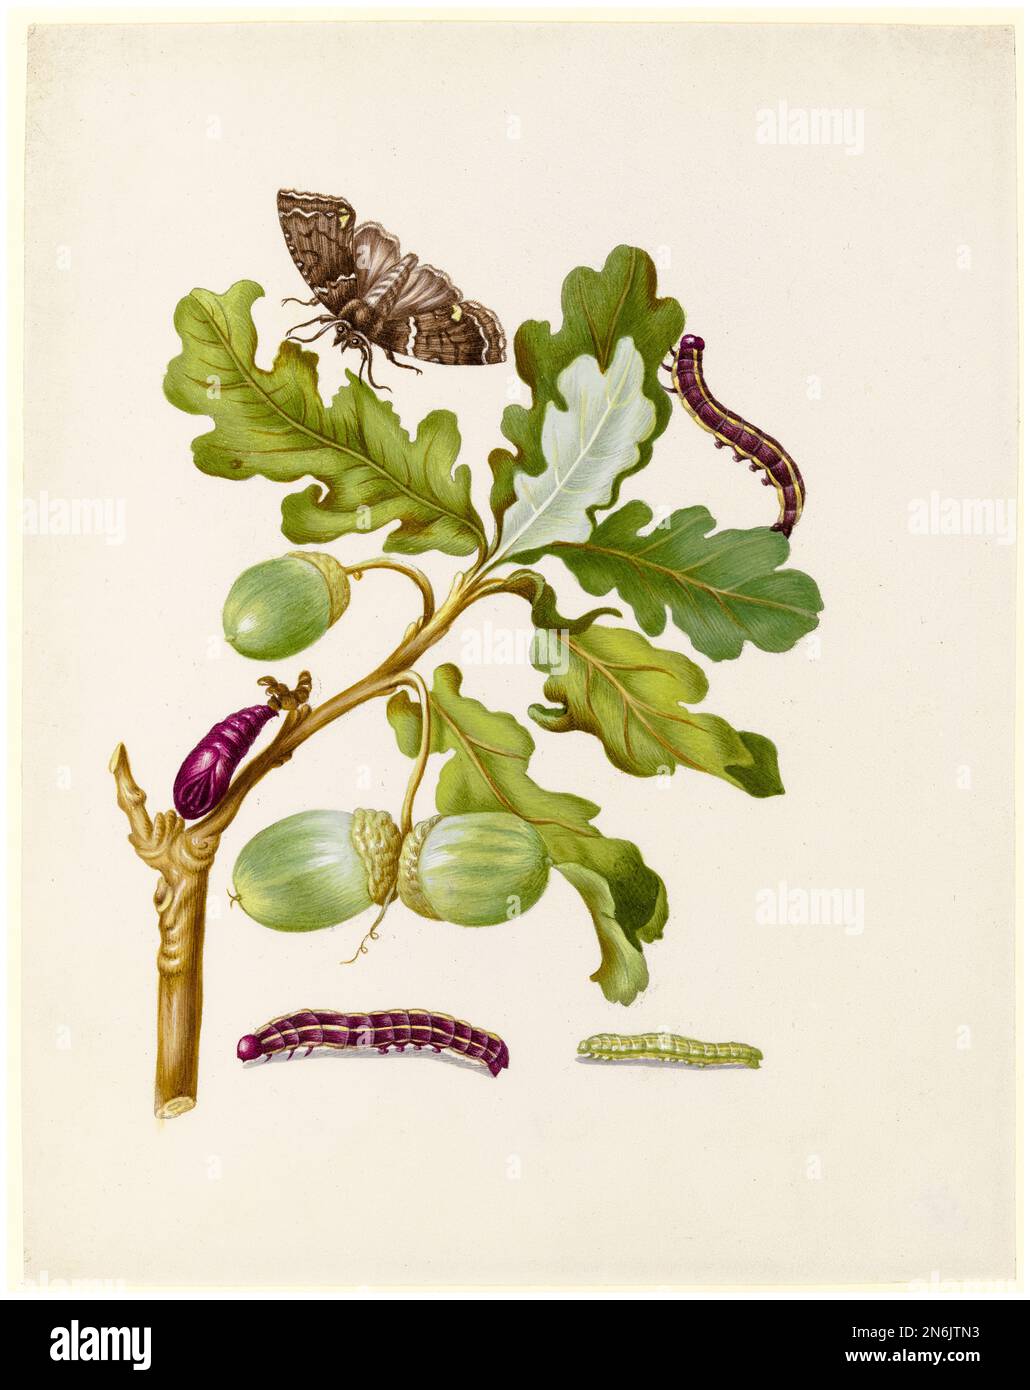 Maria Sibylla Merian illustration, Oak branch with Owlet Moth (Noctuidae), Caterpillars and Pupa, watercolour and gouache on vellum, after 1679 Stock Photo